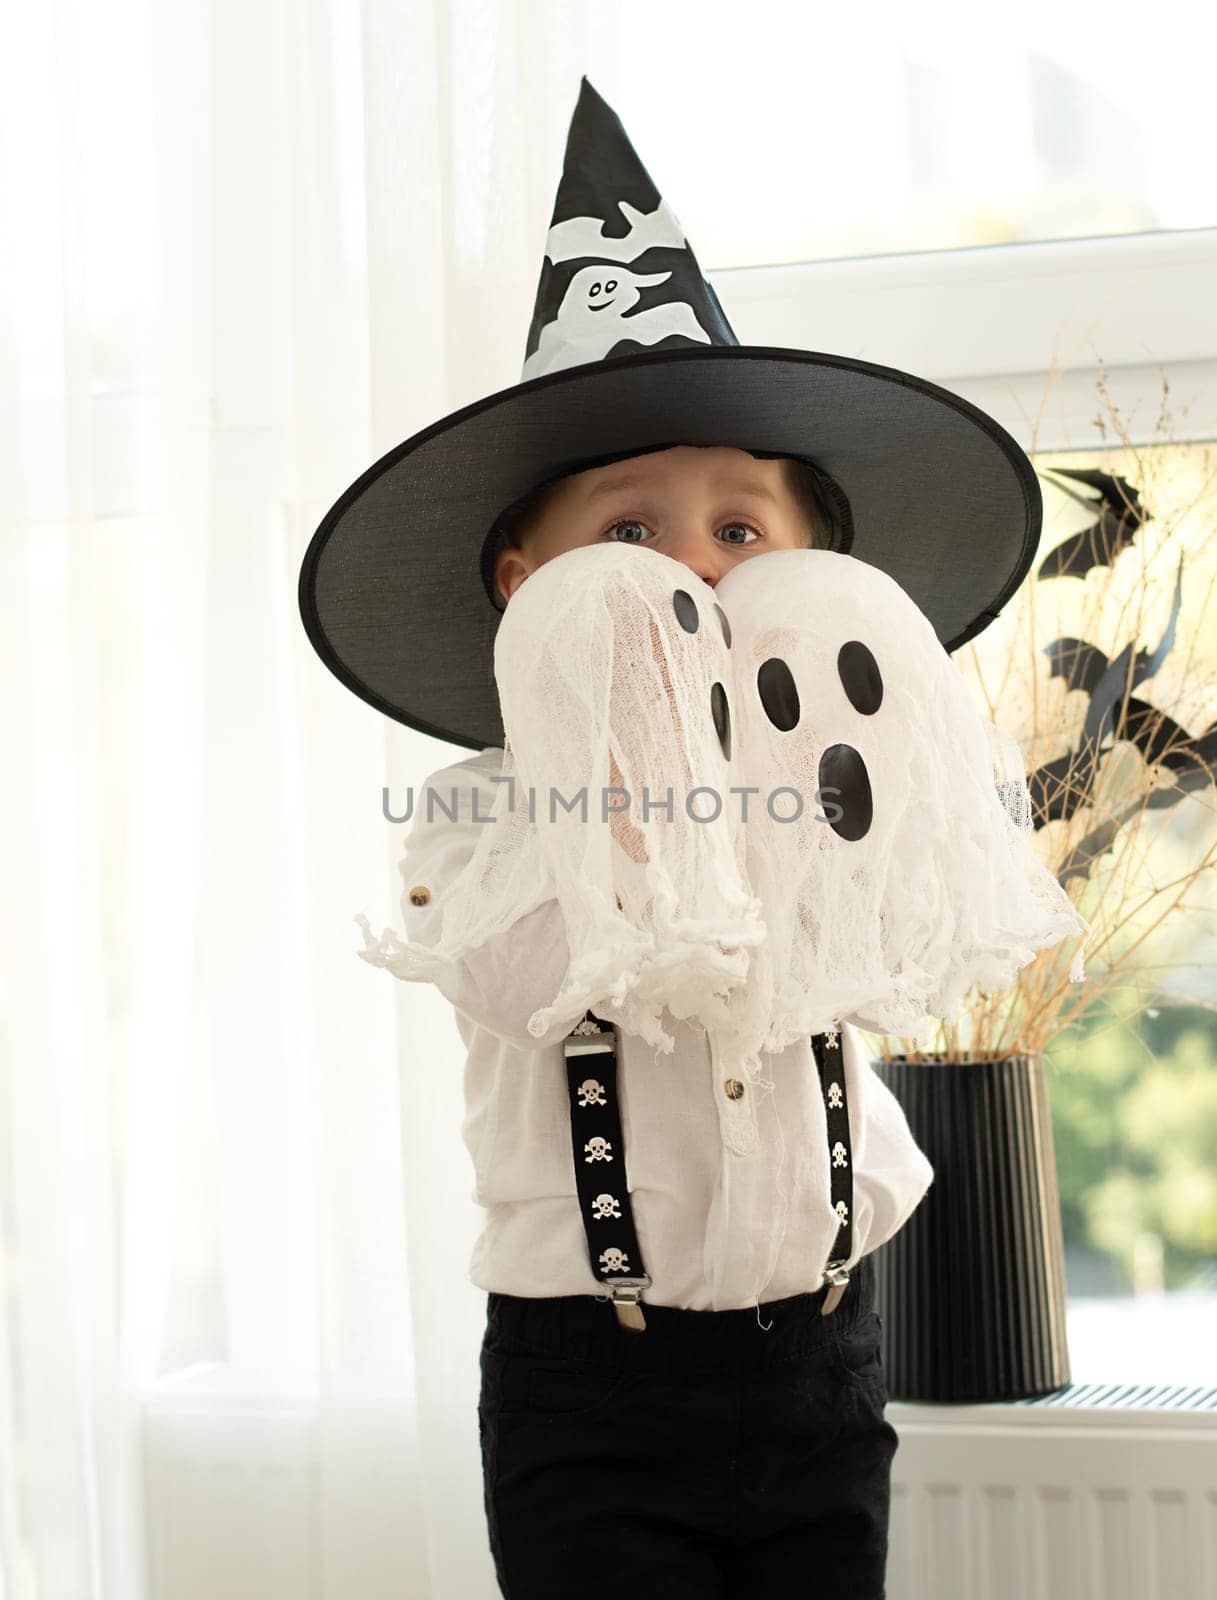 Halloween concept. A small handsome boy in a wizard's hat with white ghosts plays cheerfully and emotionally in a home interior against the background of a window. Close-up.